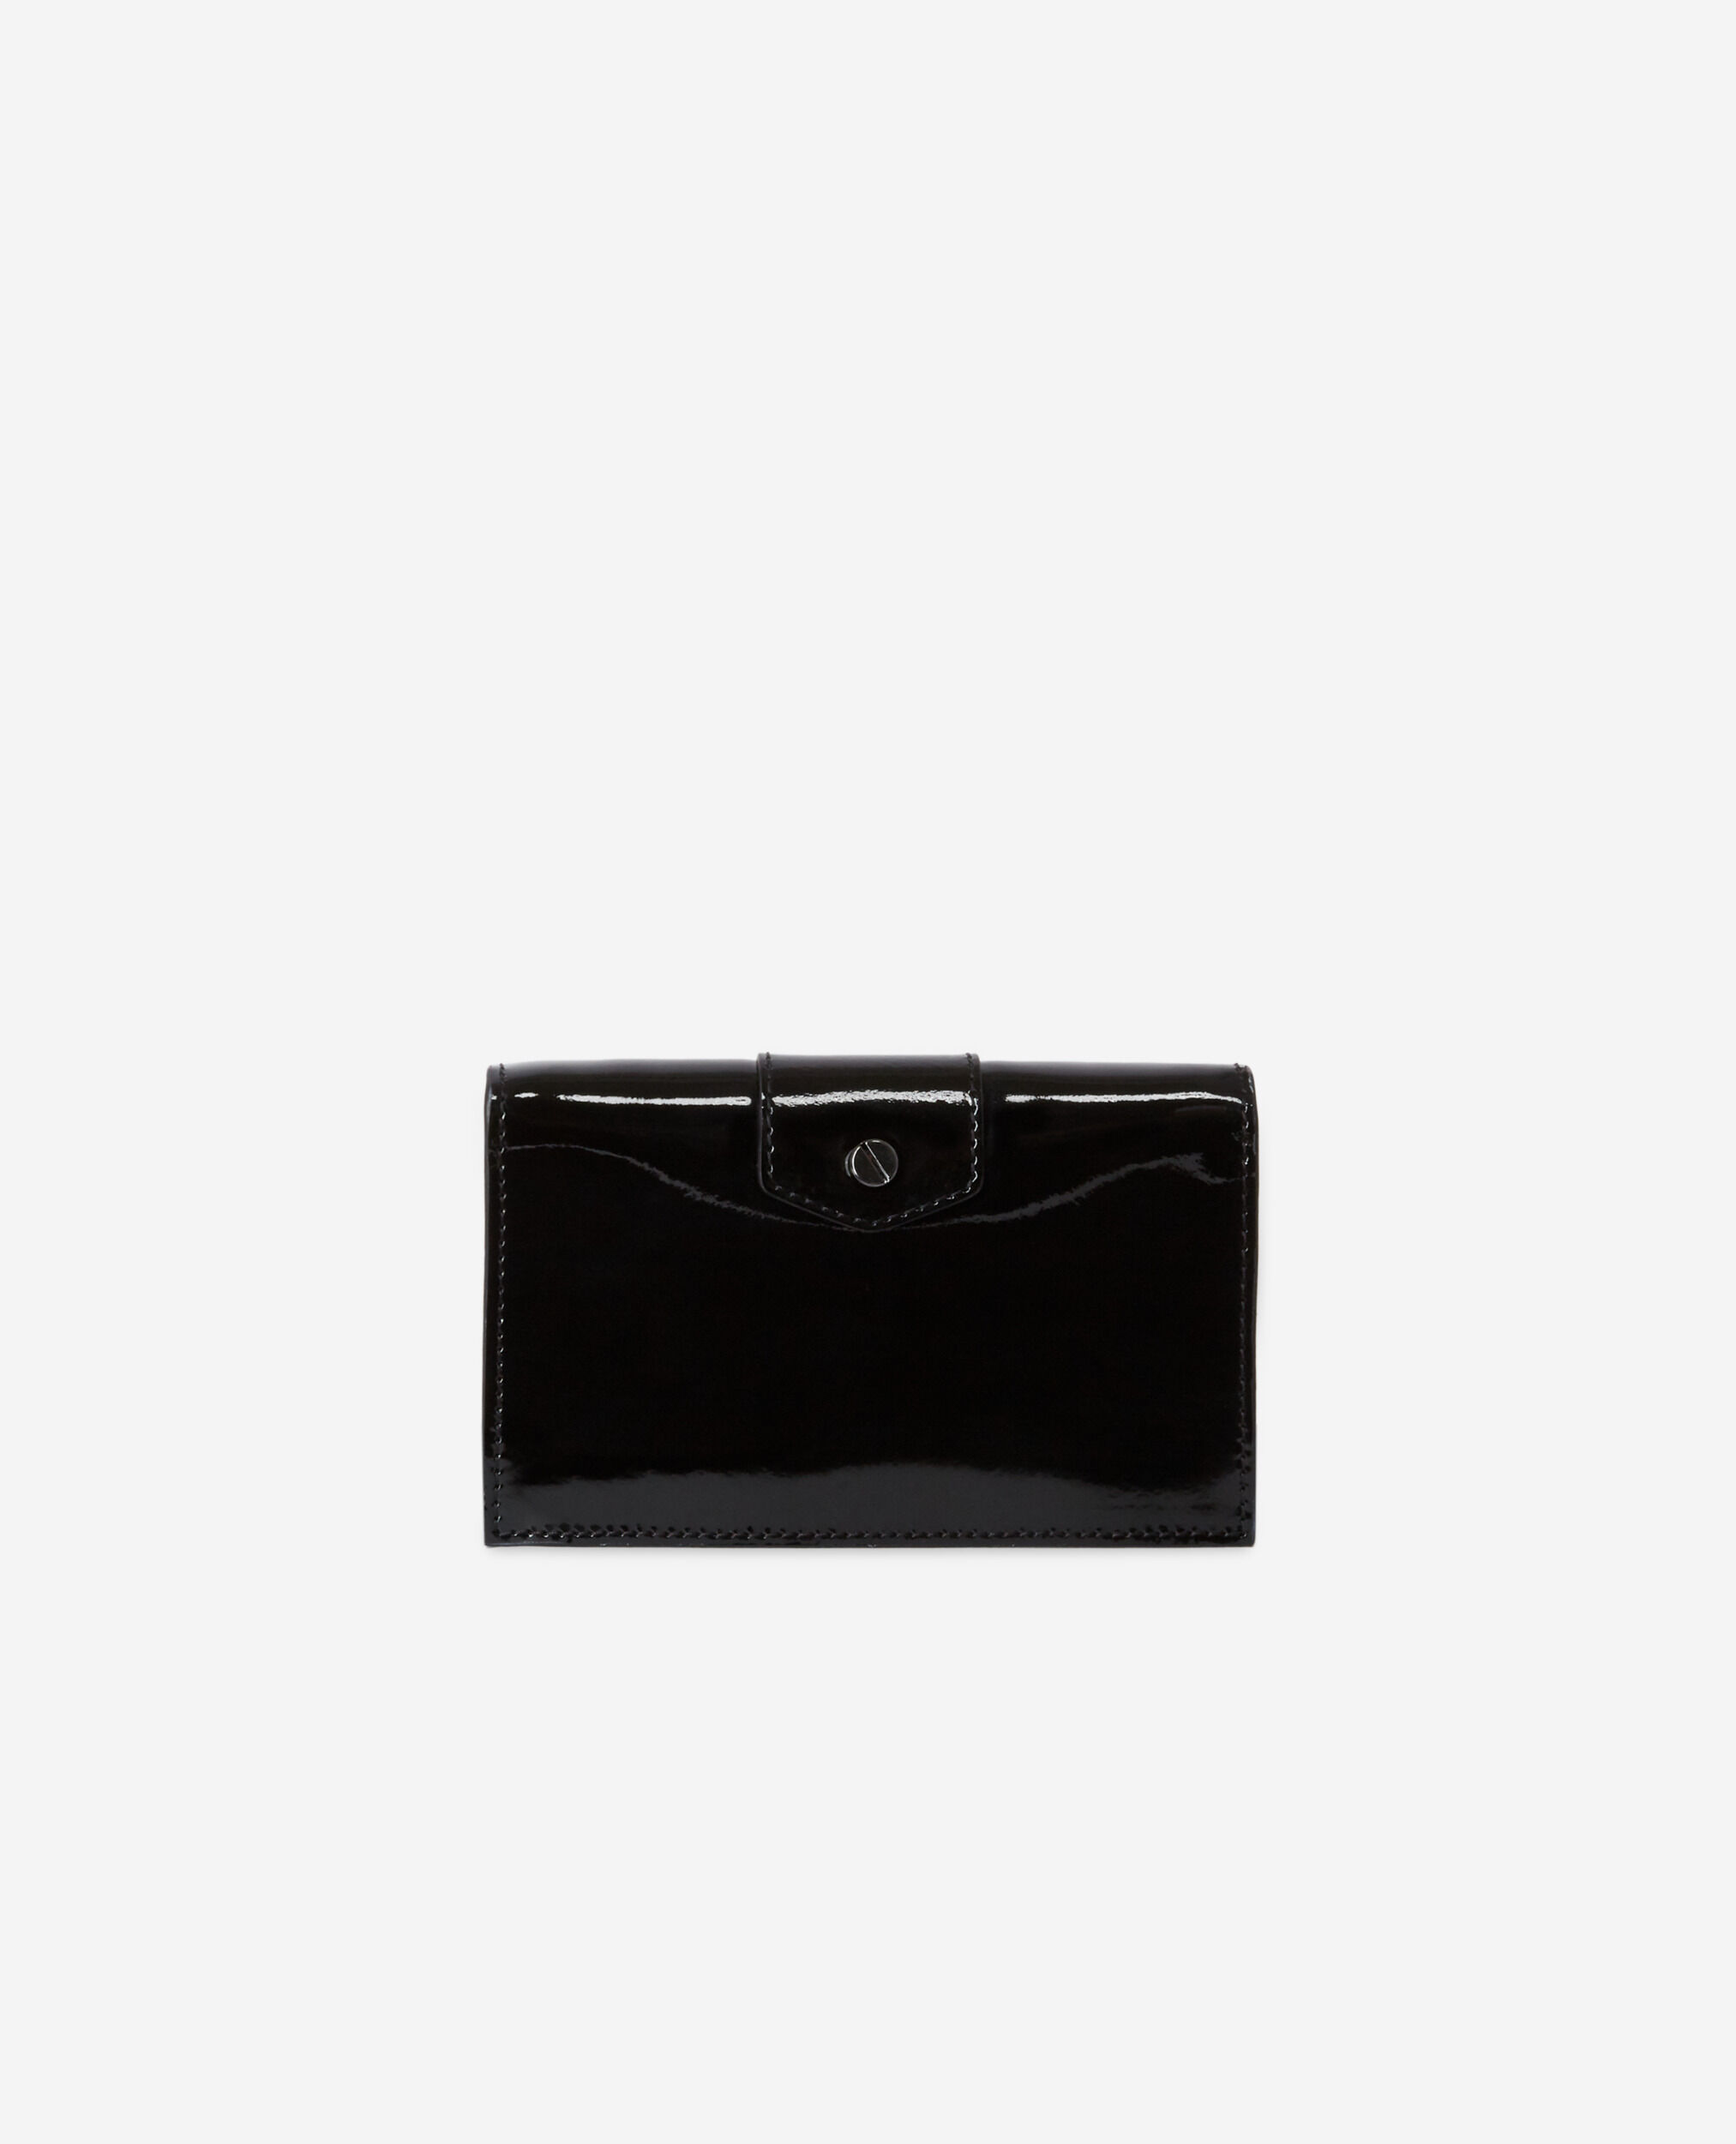 Small Emily pouch in black leather, BLACK, hi-res image number null